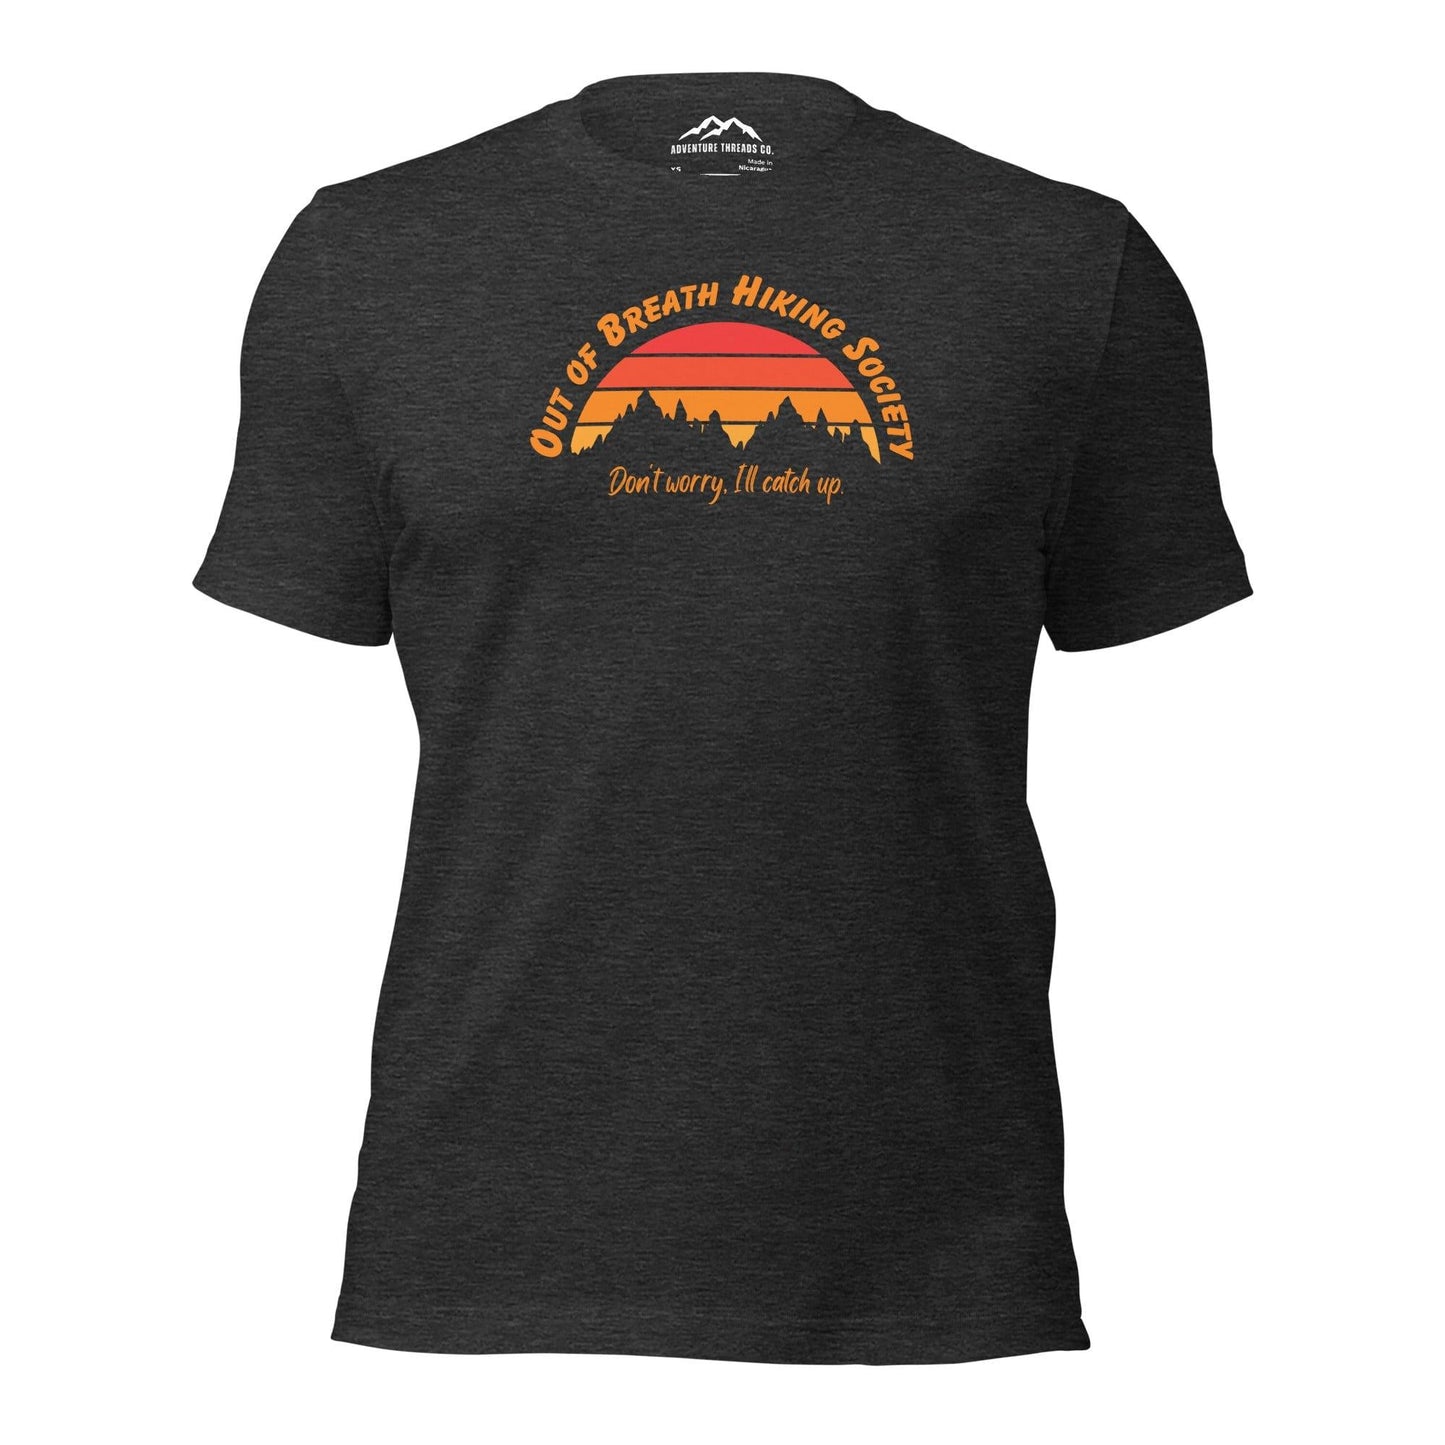 Out of Breath Hiking Society T-Shirt - Adventure Threads Company